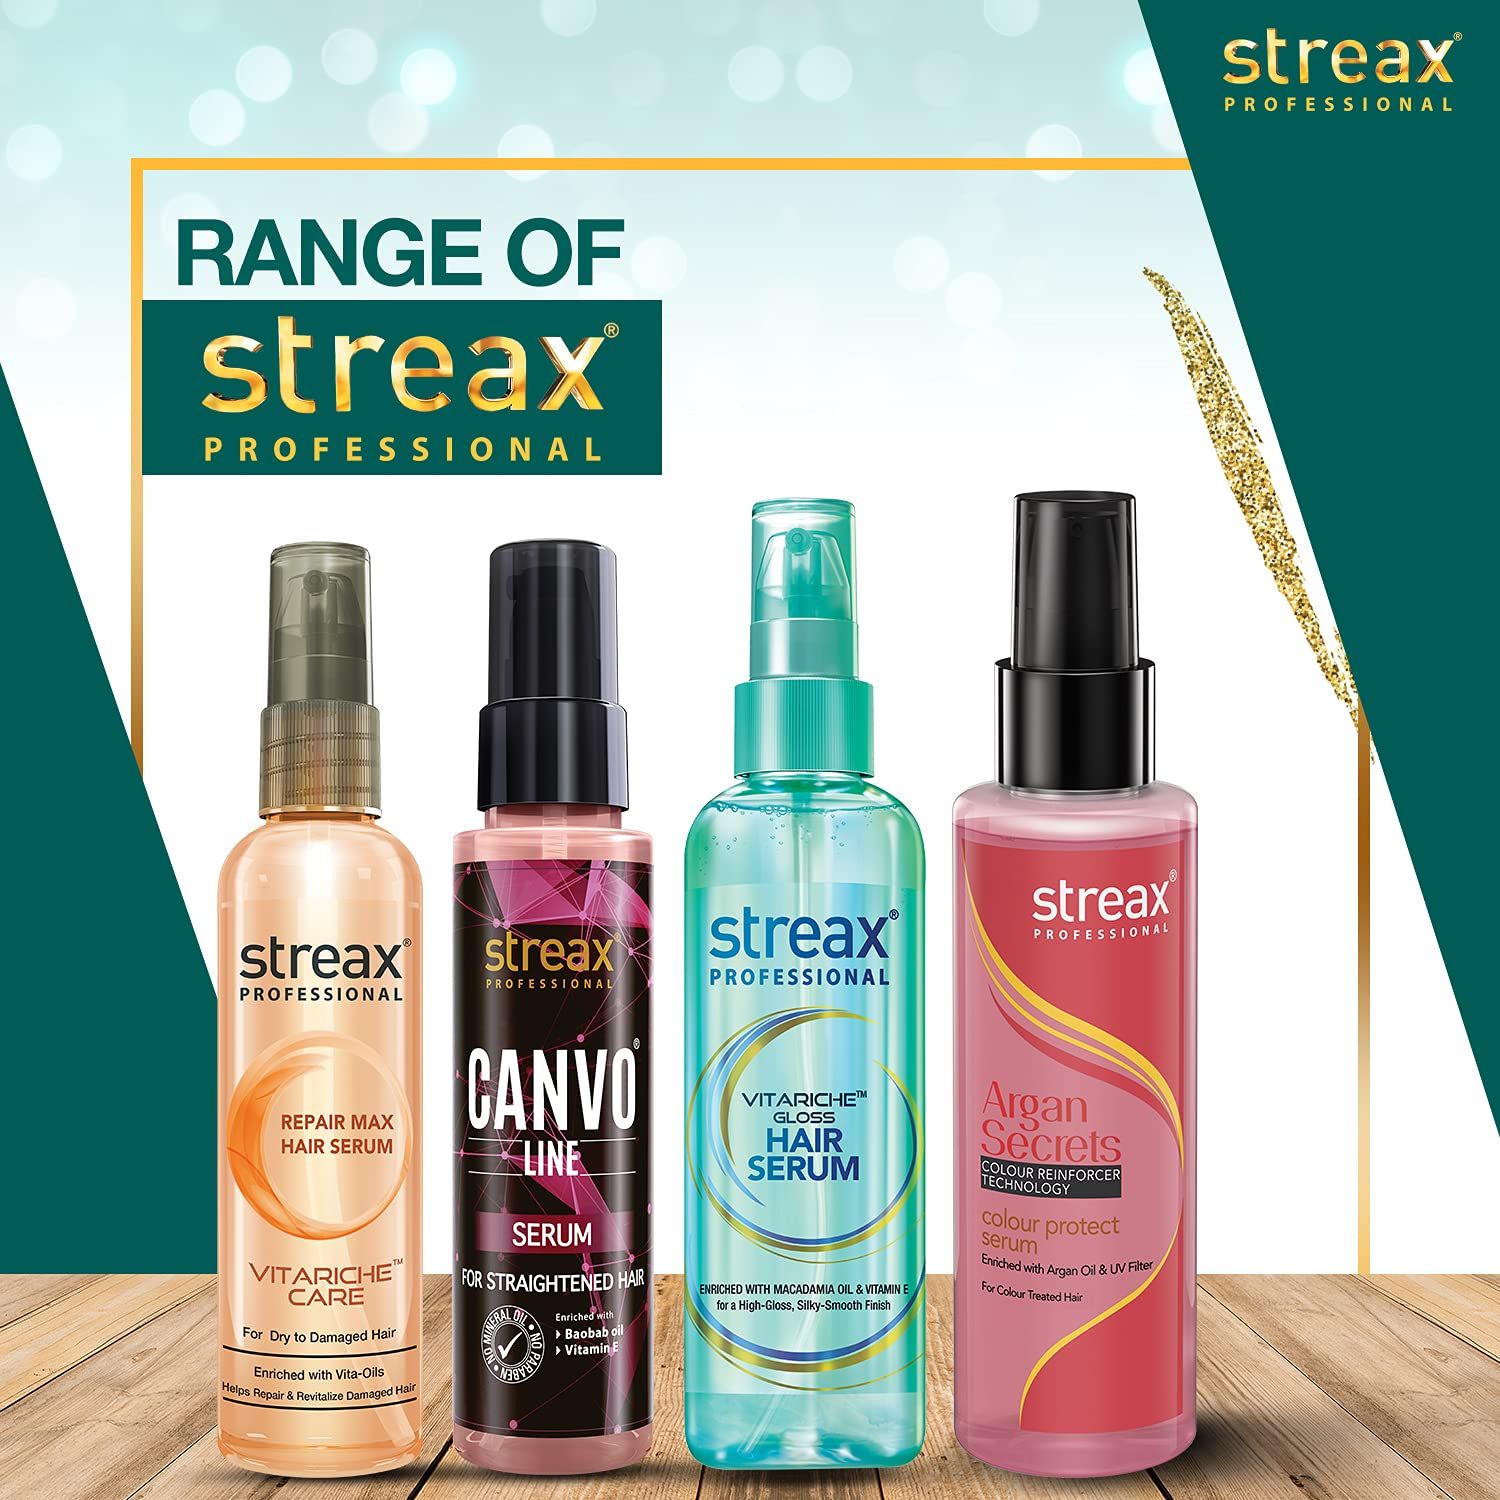  : Buy Streax Professional Vitariche Gloss Hair Serum (115ml) online  in India on Foxy. Free shipping, watch expert reviews.